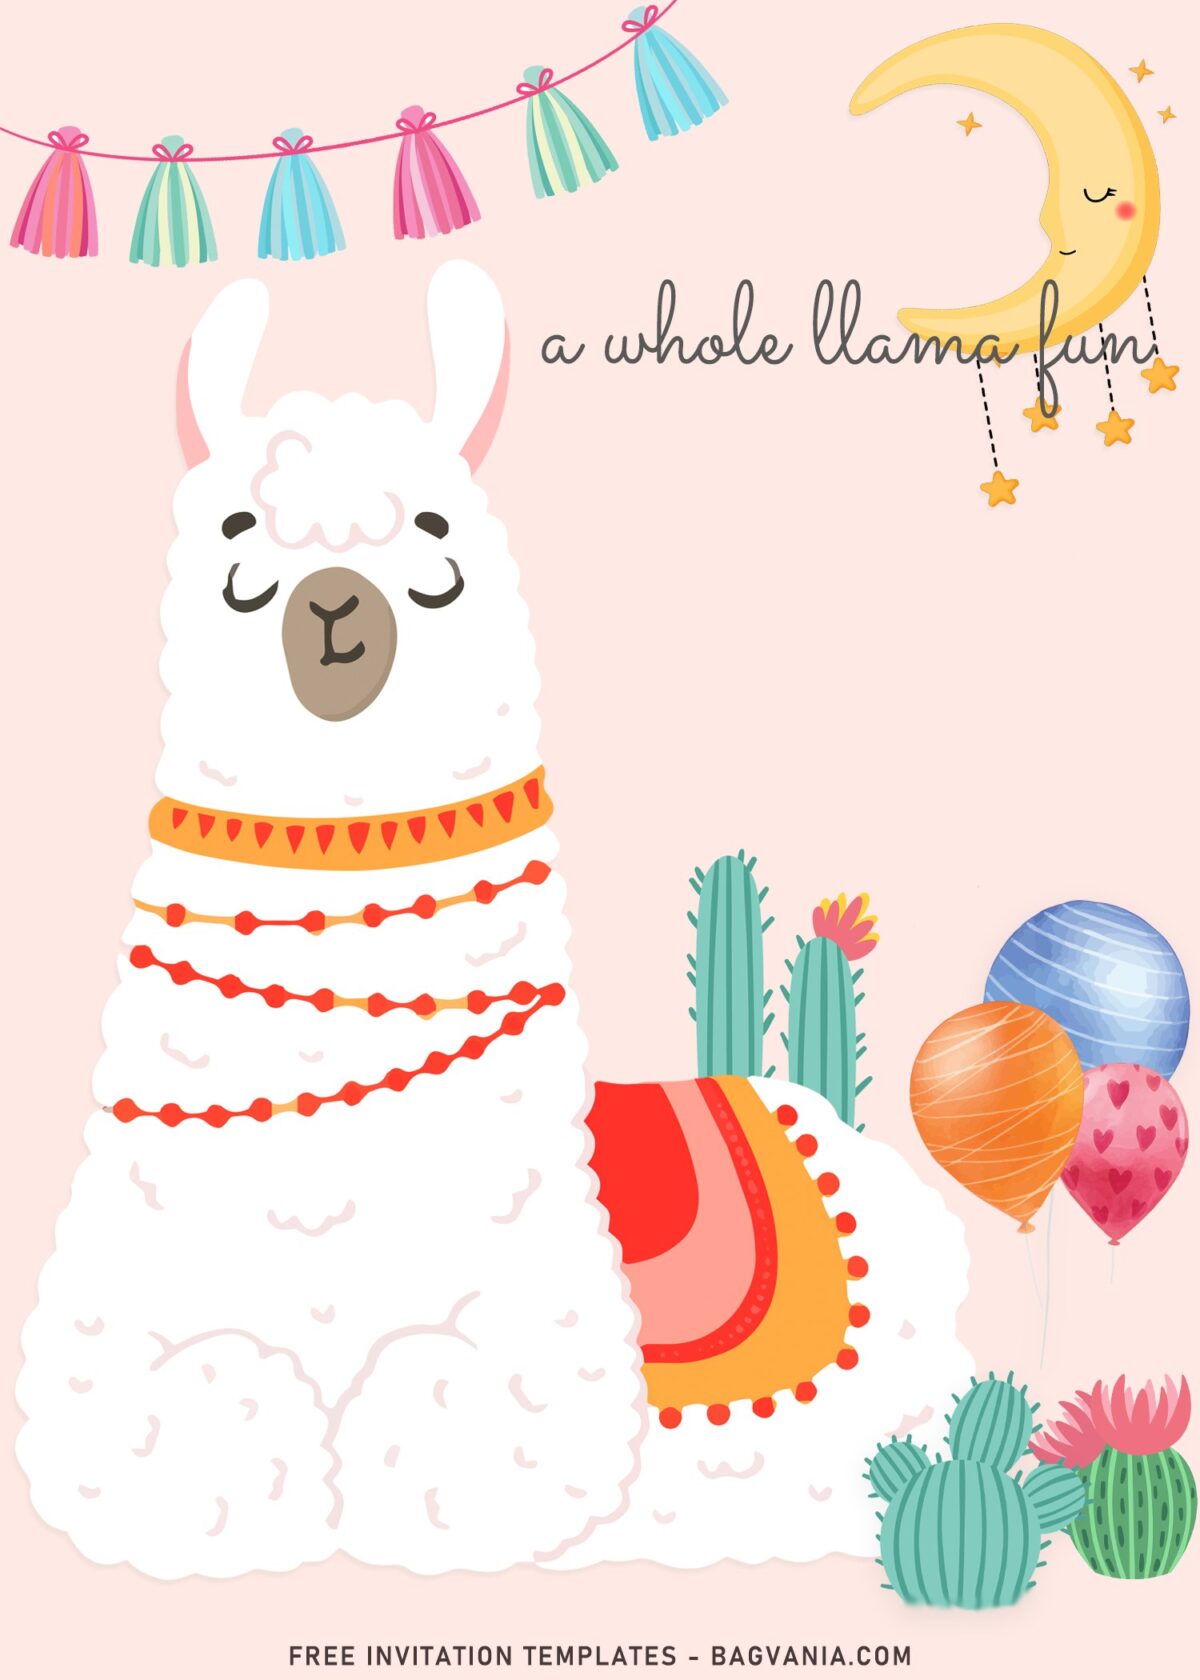 8+ Whole Llama Fun Birthday Invitation Templates For Birthday Girls with colorful balloons